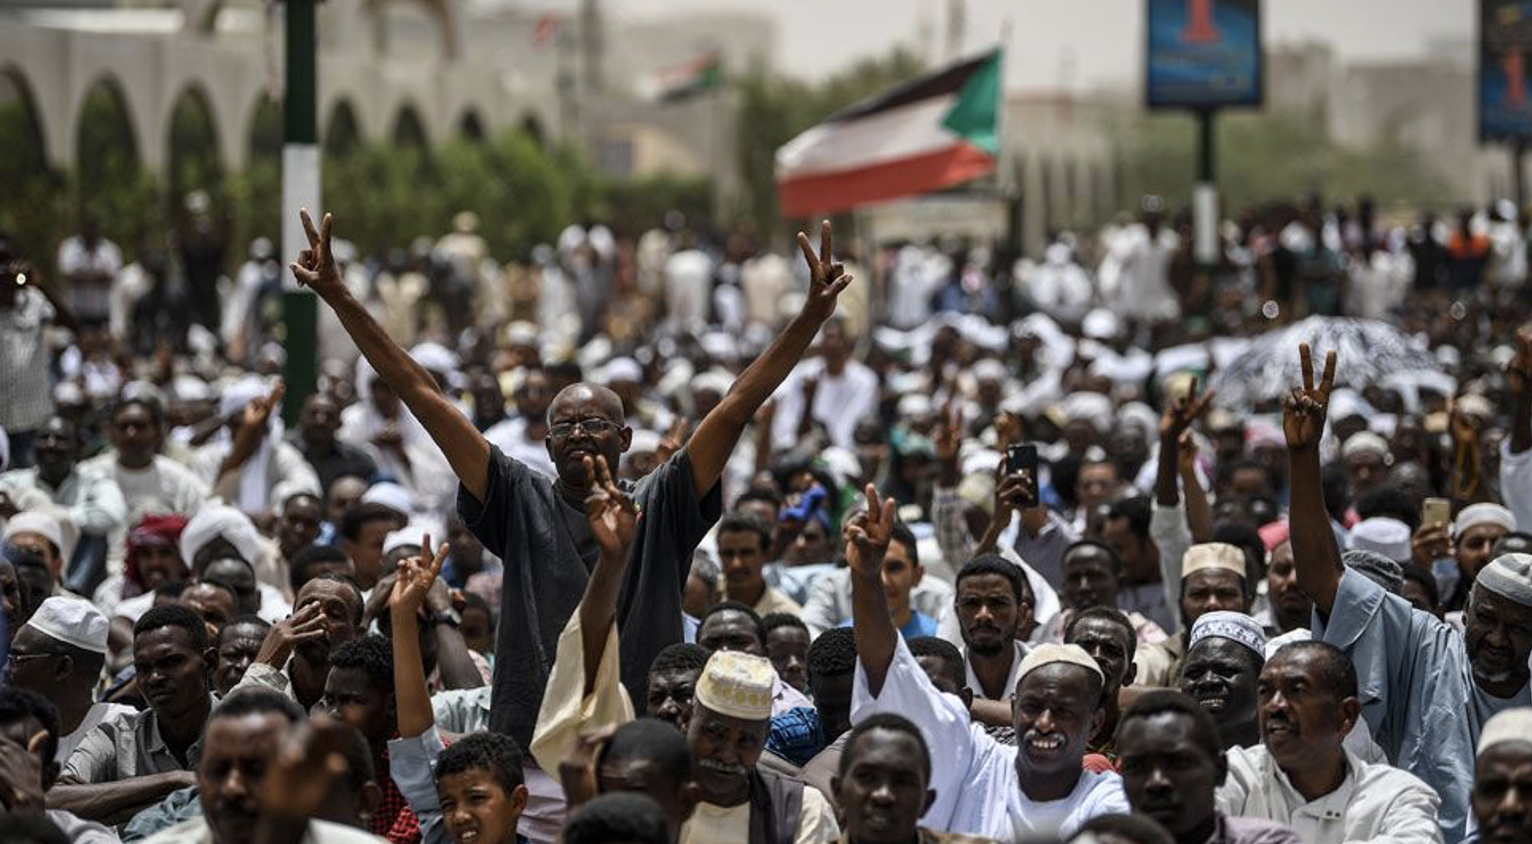 An overview of Sudan’s Humanitarian Crisis: A Call for International Action